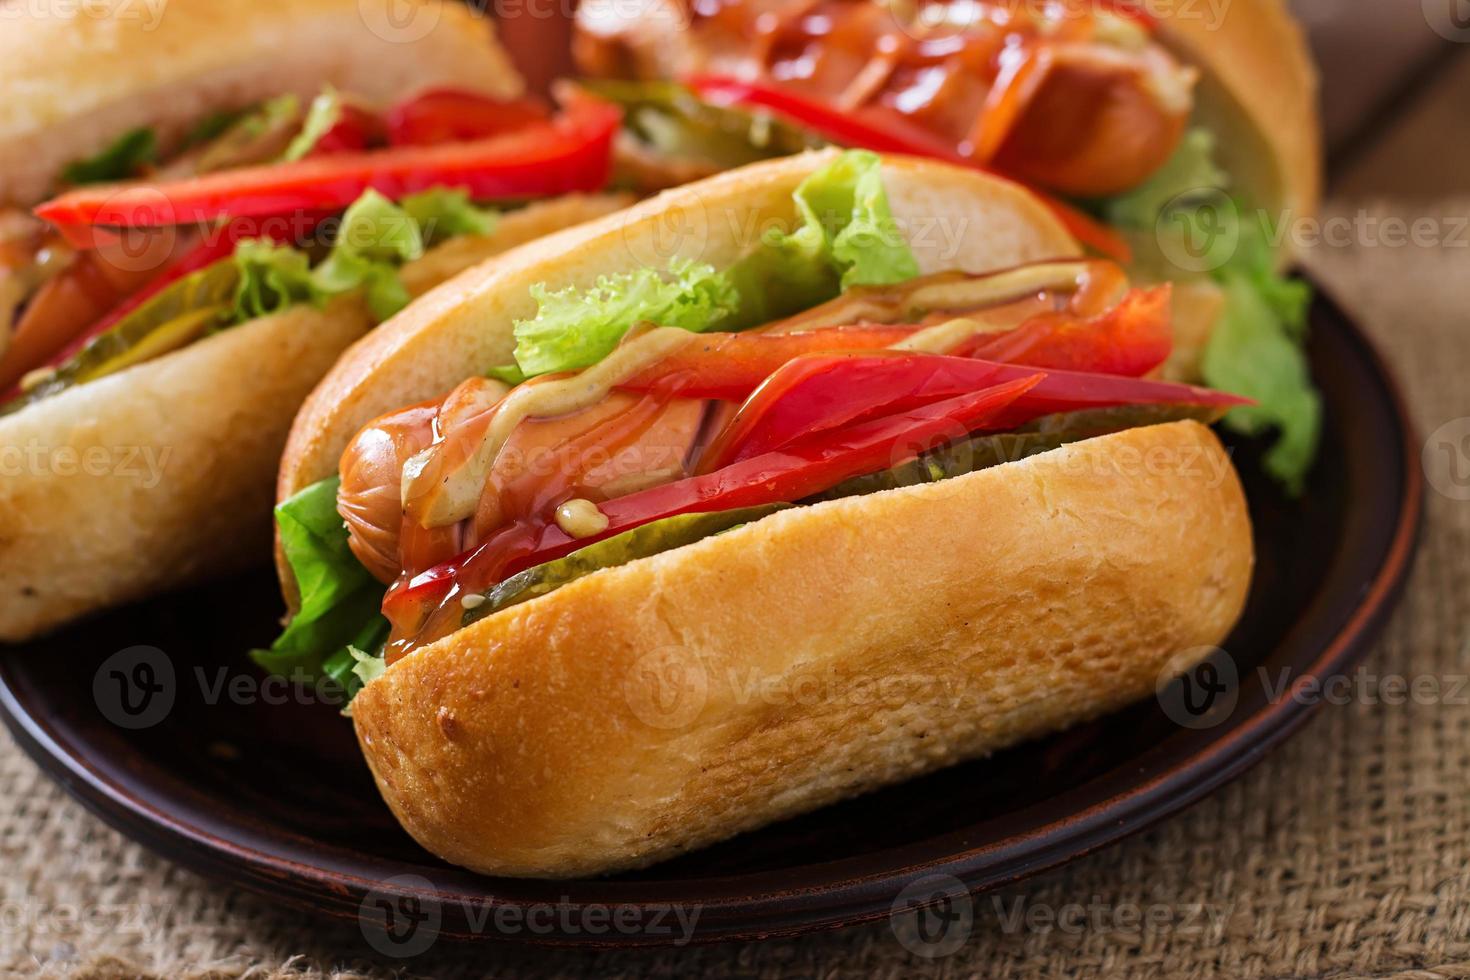 Hot dog - sandwich with pickles, paprika and lettuce on wooden background photo